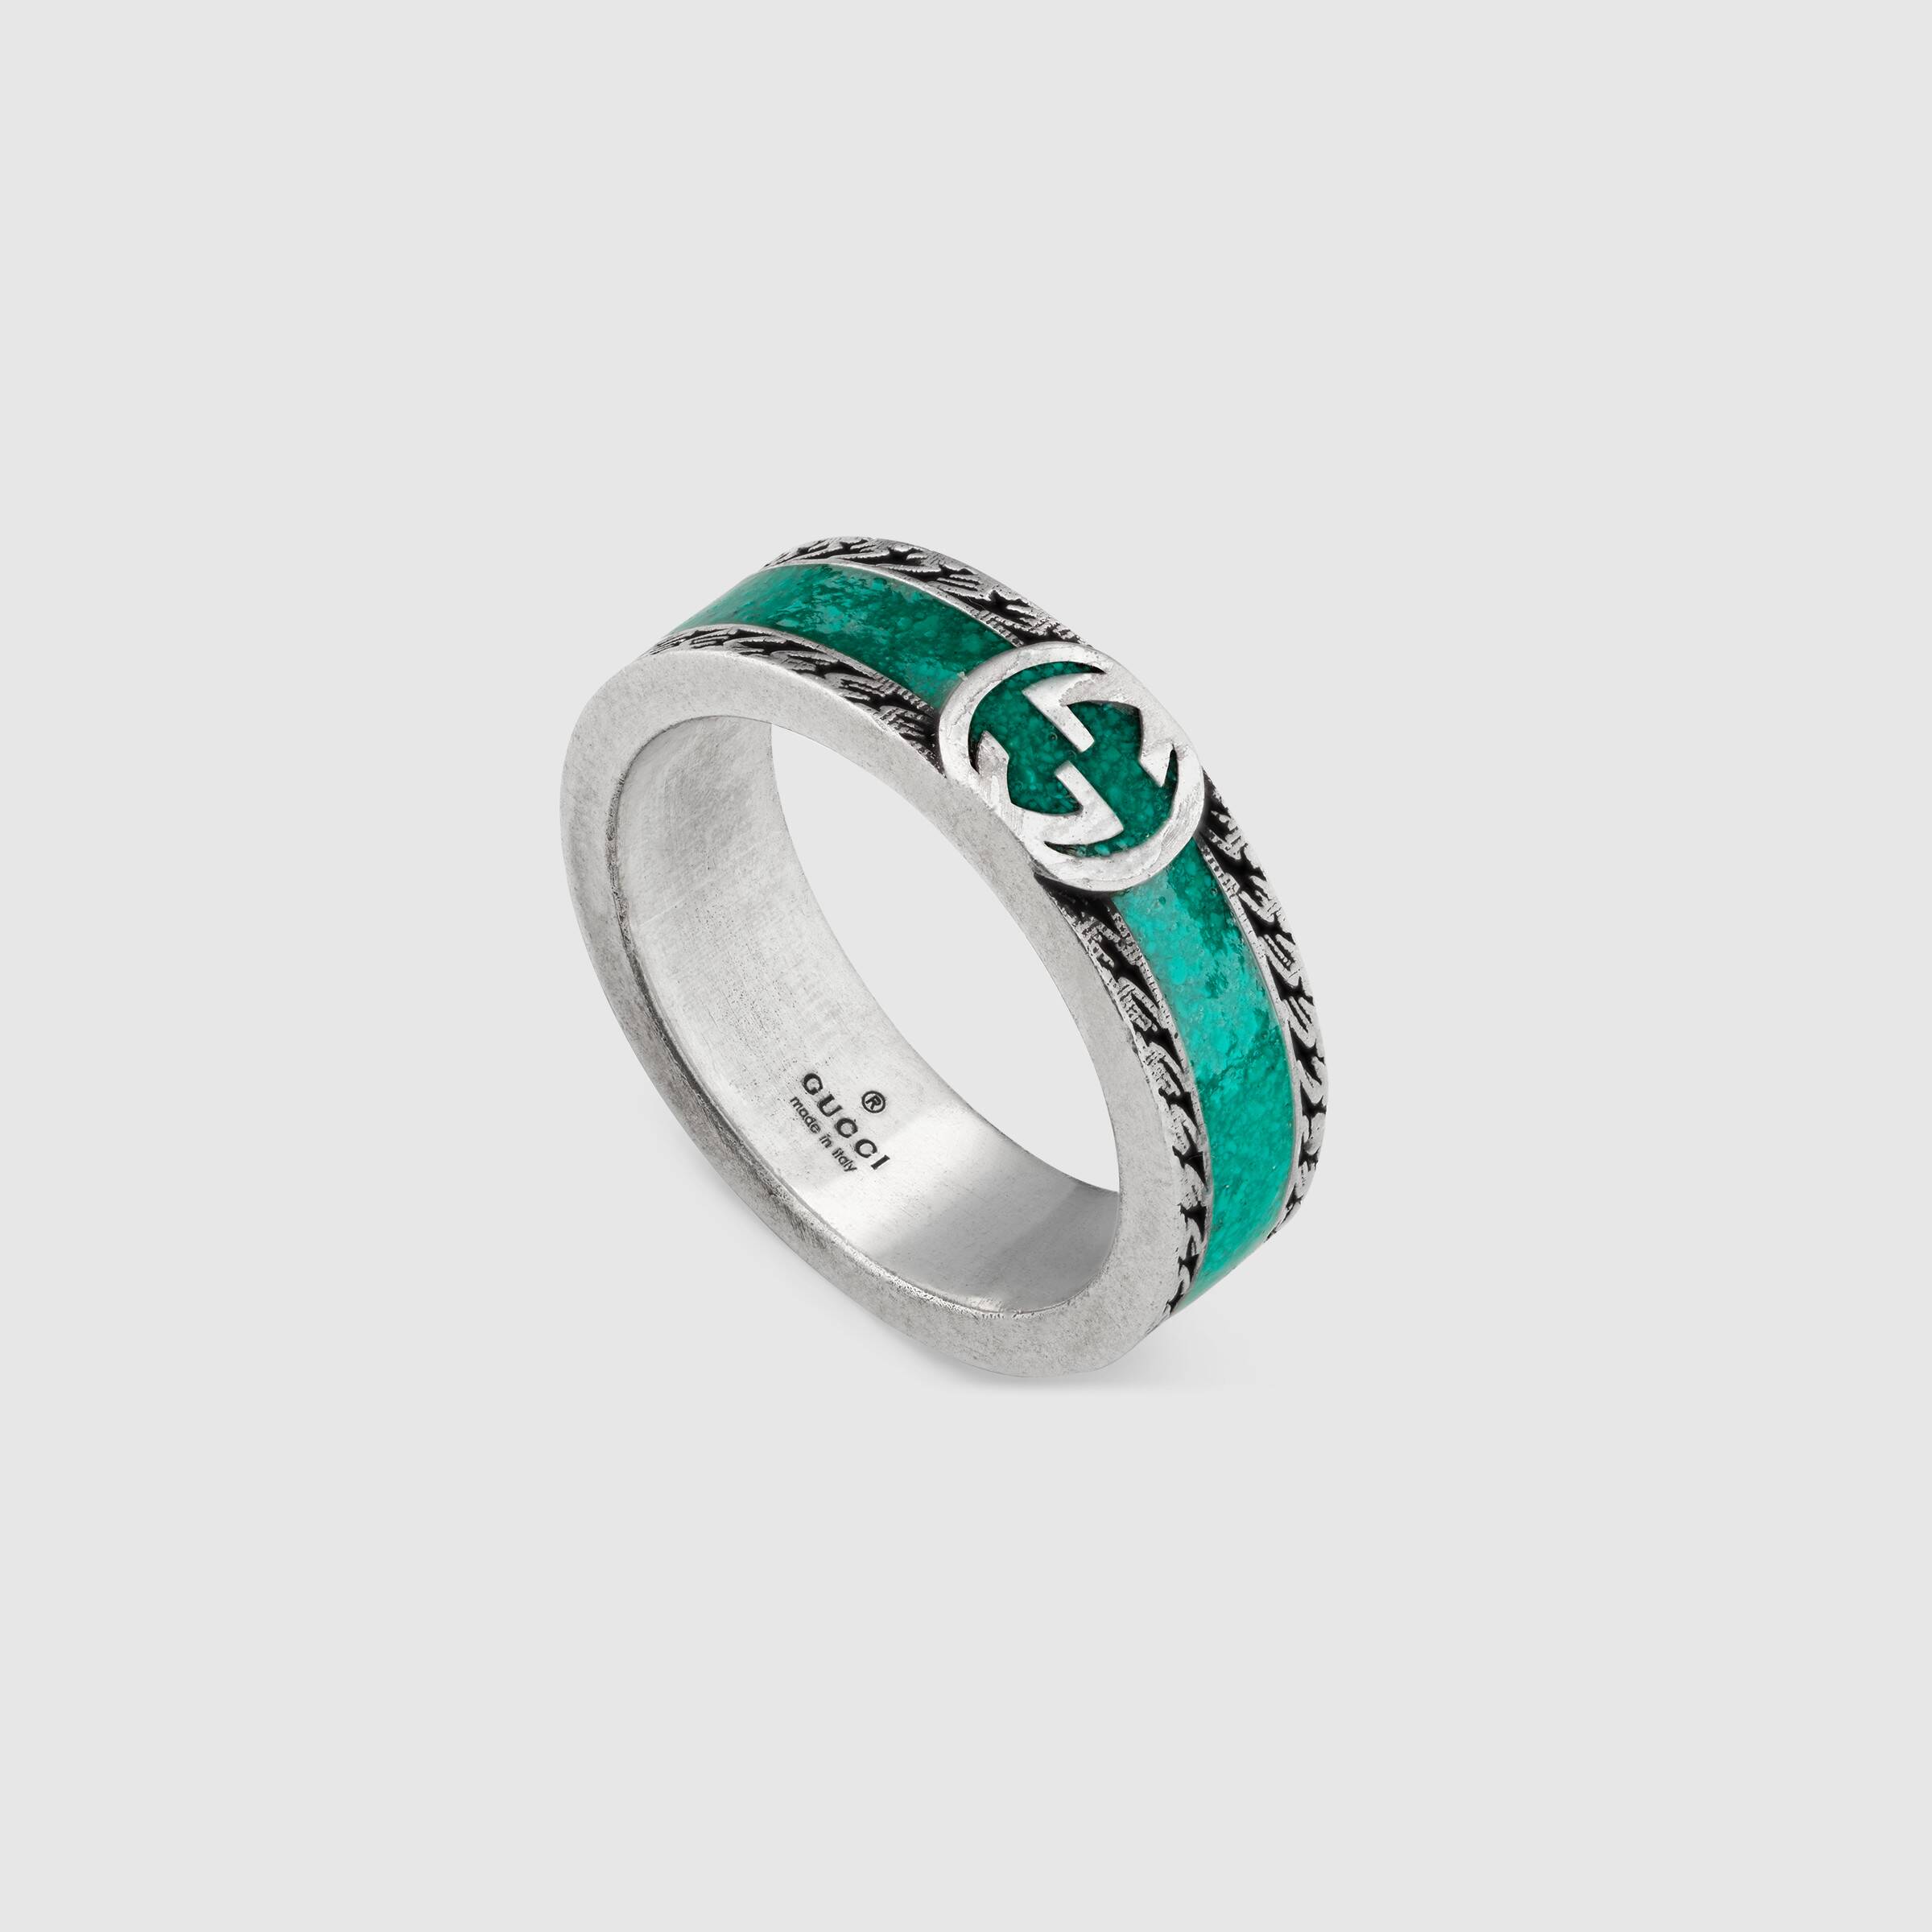 Gucci Interlocking G Silver Ring with Turquoise Enamel